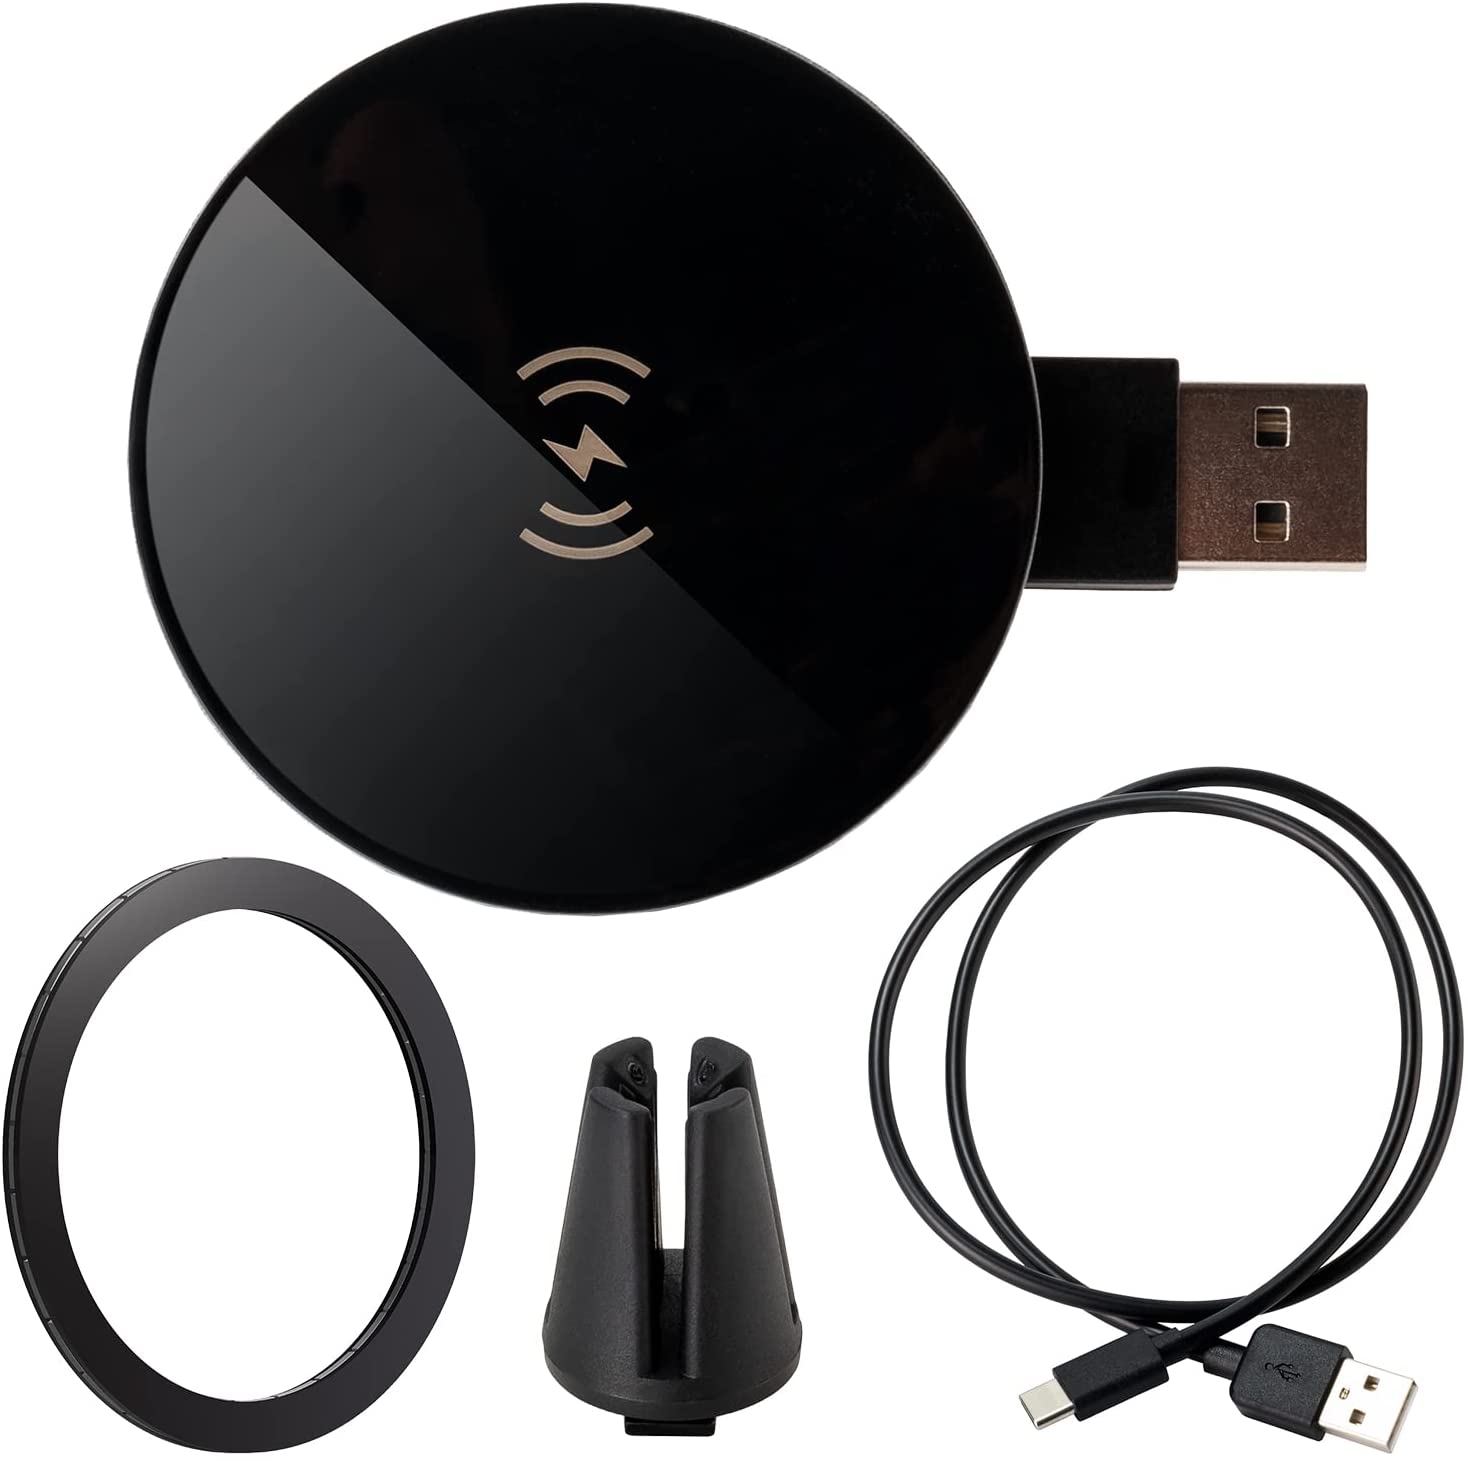 Image of Ultimaxx Ulti-MagCharger Wireless Qi Fast Charger with Built-in USB-A/USB-C Plug, Metal Adhesive Ring, 2ft USB-C to USB-A Cable, and Vent Mount